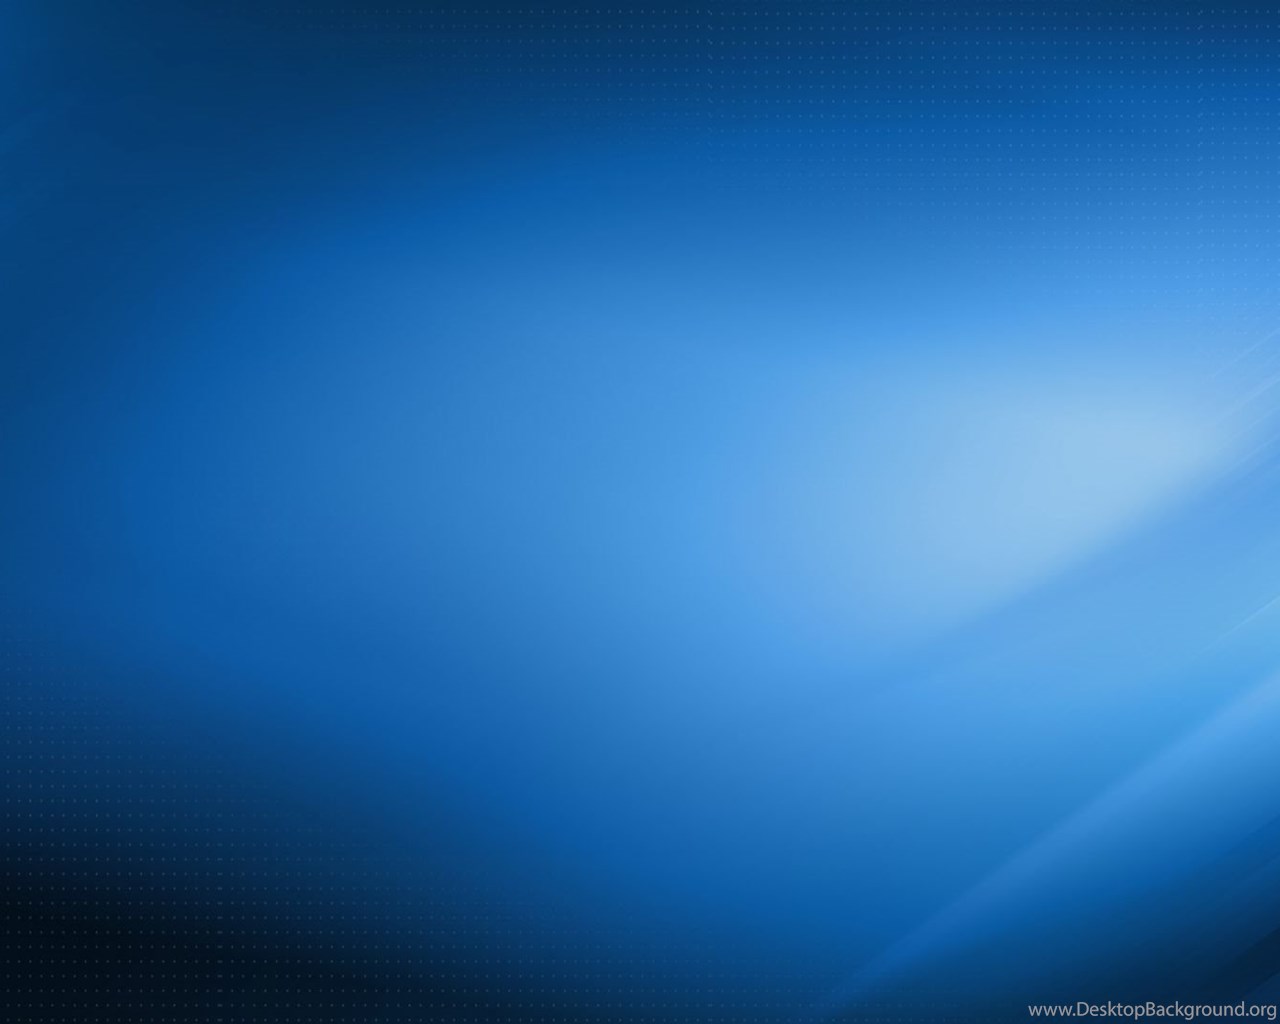 Download Blue Windows Wallpapers 1764 1920x1080 Px High Resolution